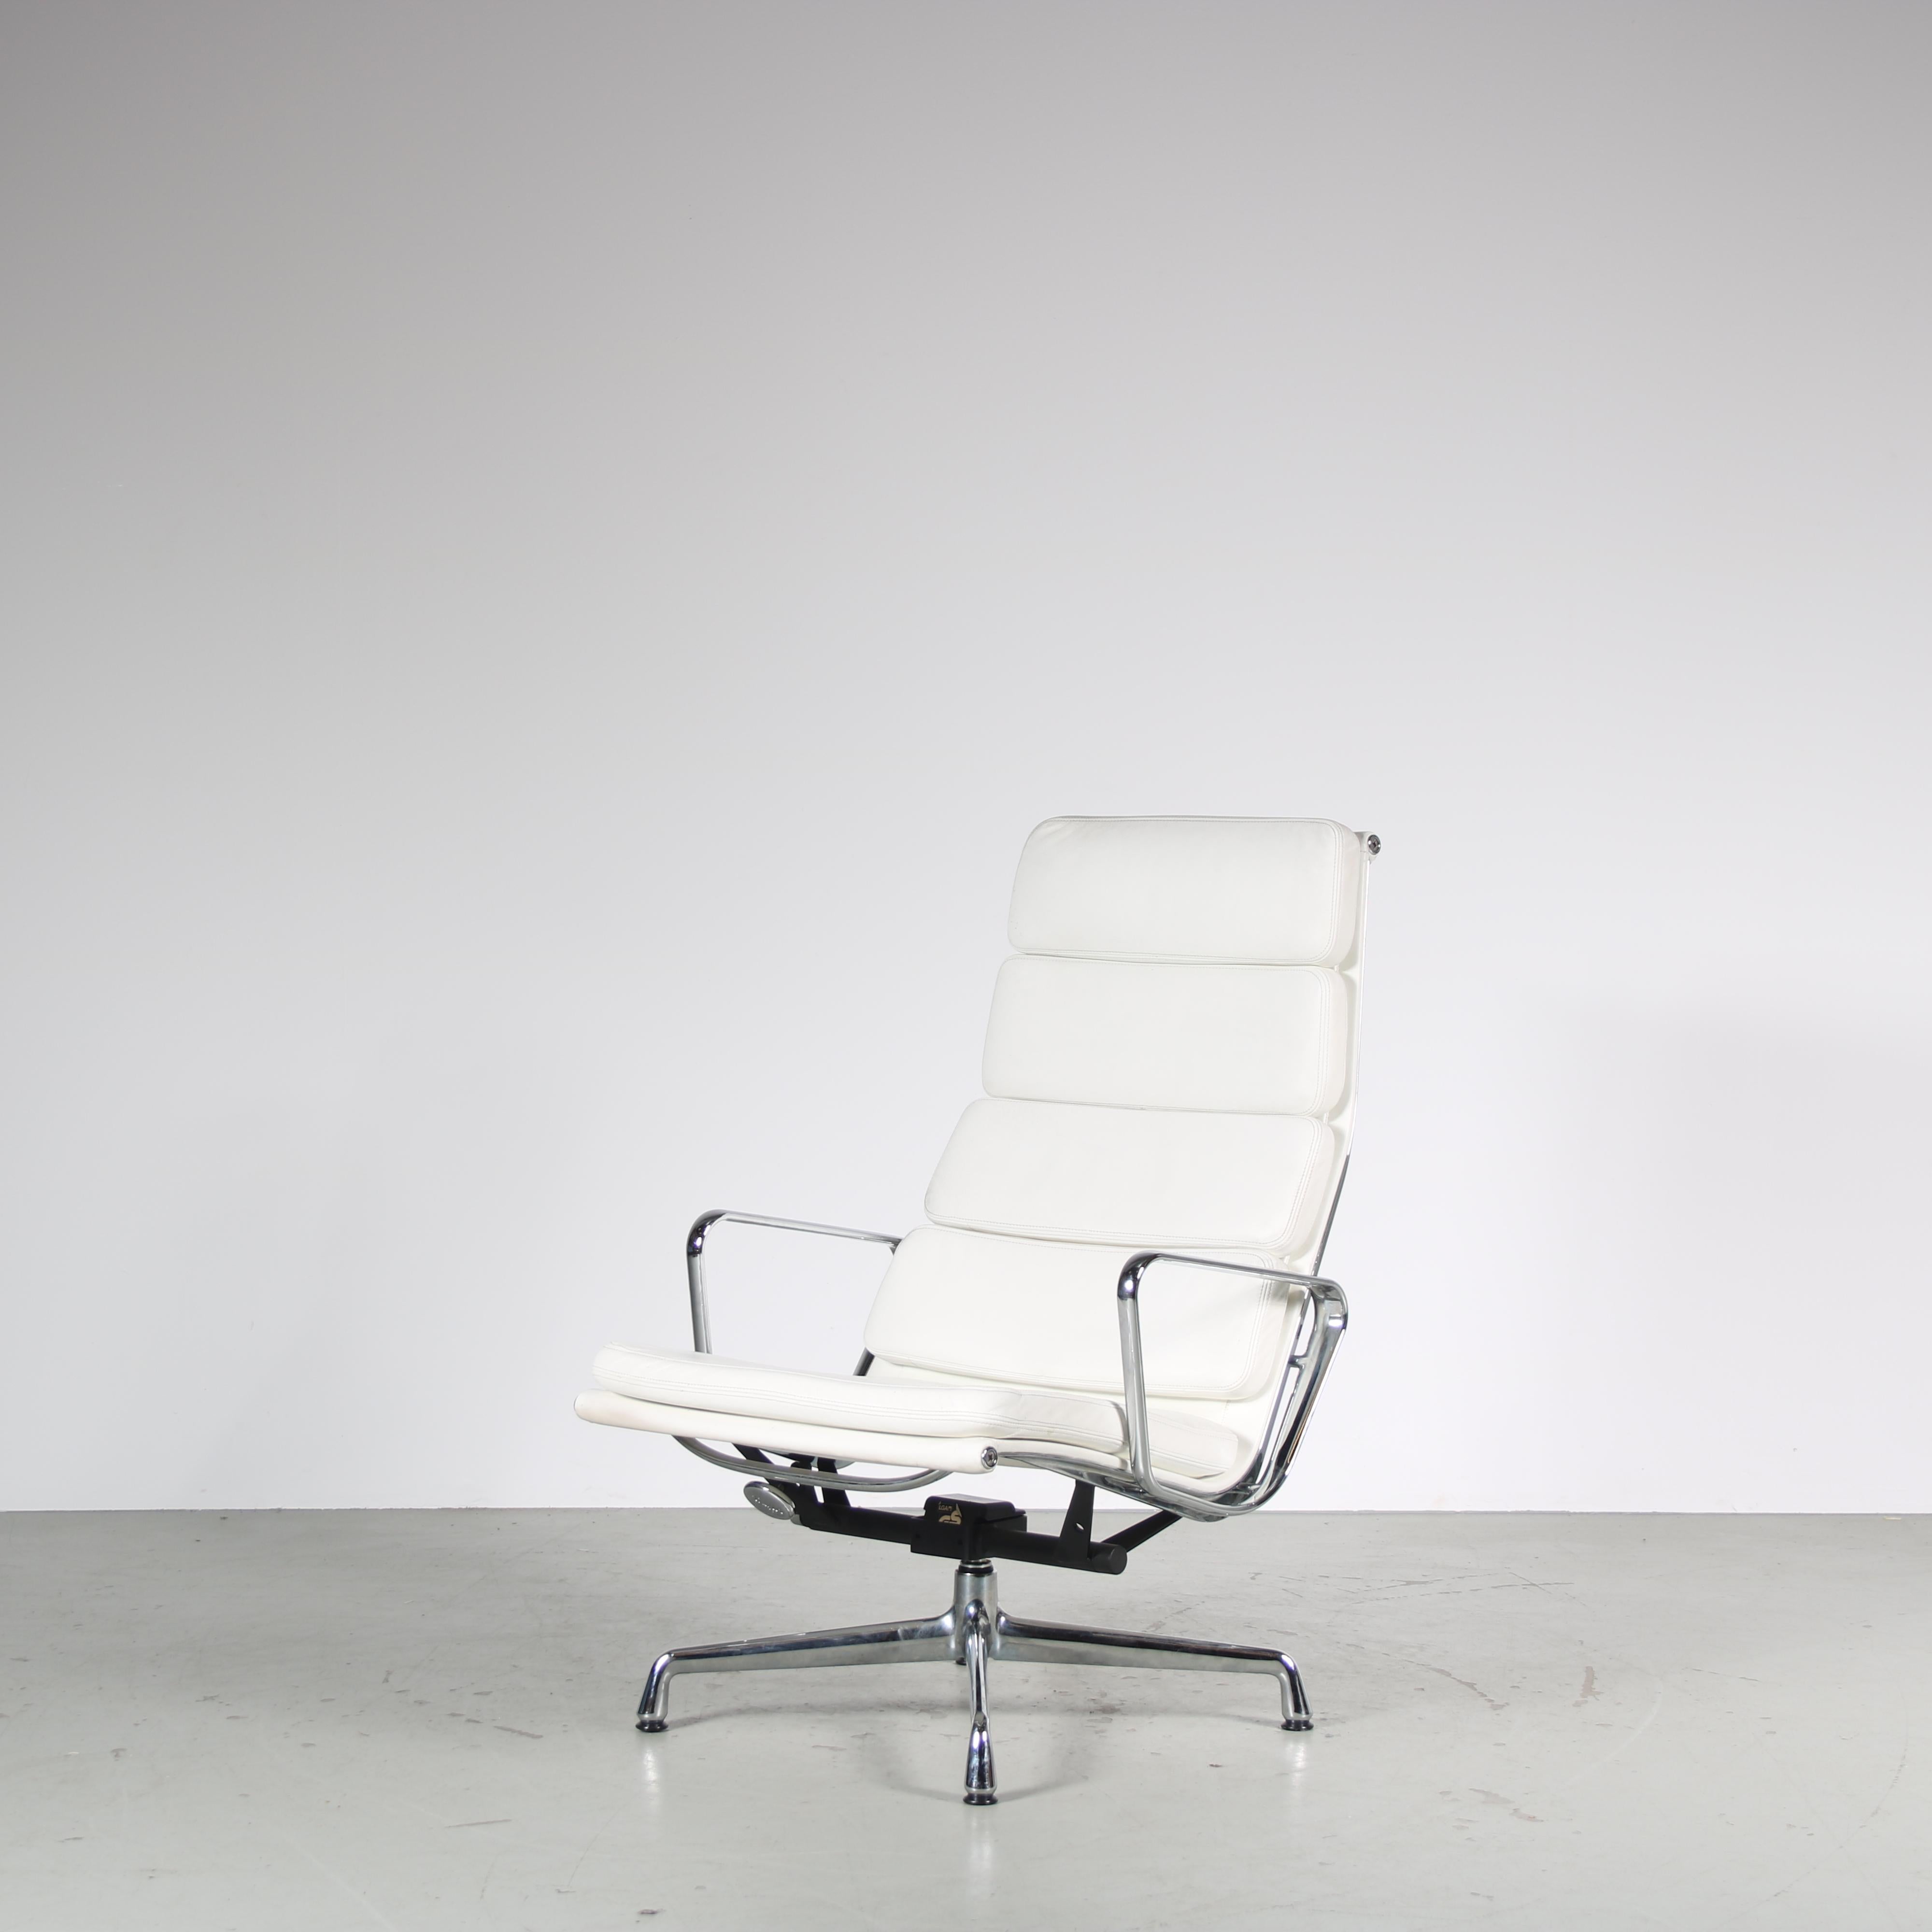 A wonderful lounge chair, model EA 222, designed by Charles & Ray Eames and manufactured by Vitra in Germany around 1990.

This eye-catching chair is a highly recognizable piece of mid-century design! It has a chrome plated metal frame with black